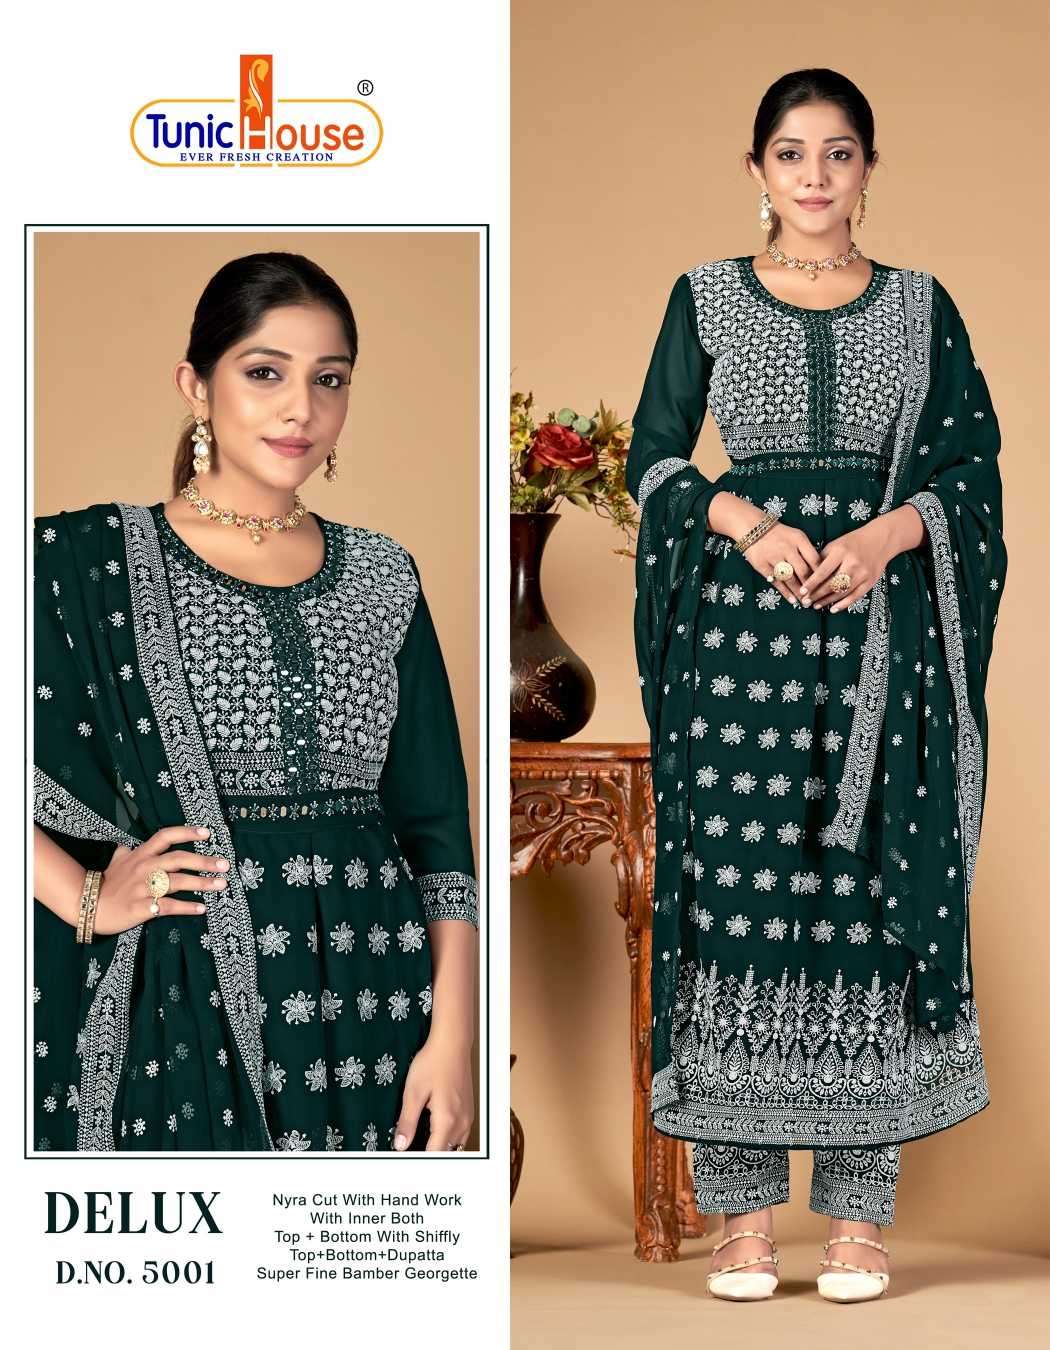 tunic house delux series 5023-5026 bemberg georgette suit 